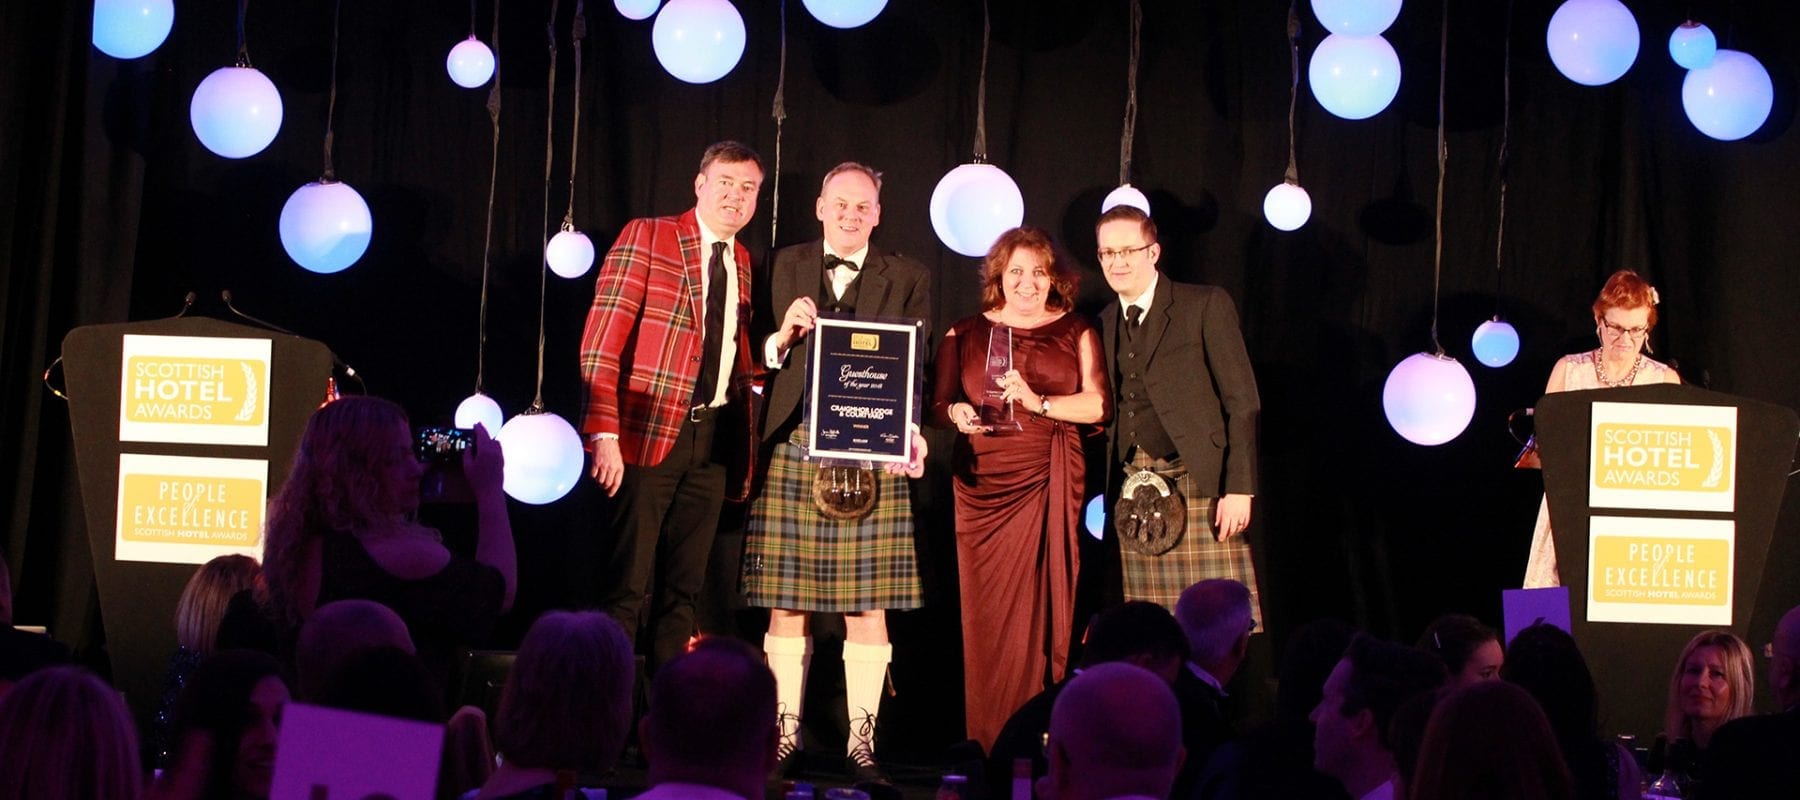 Winner of Best Guest House in Scotland 2019 at the Scottish Hotel Awards